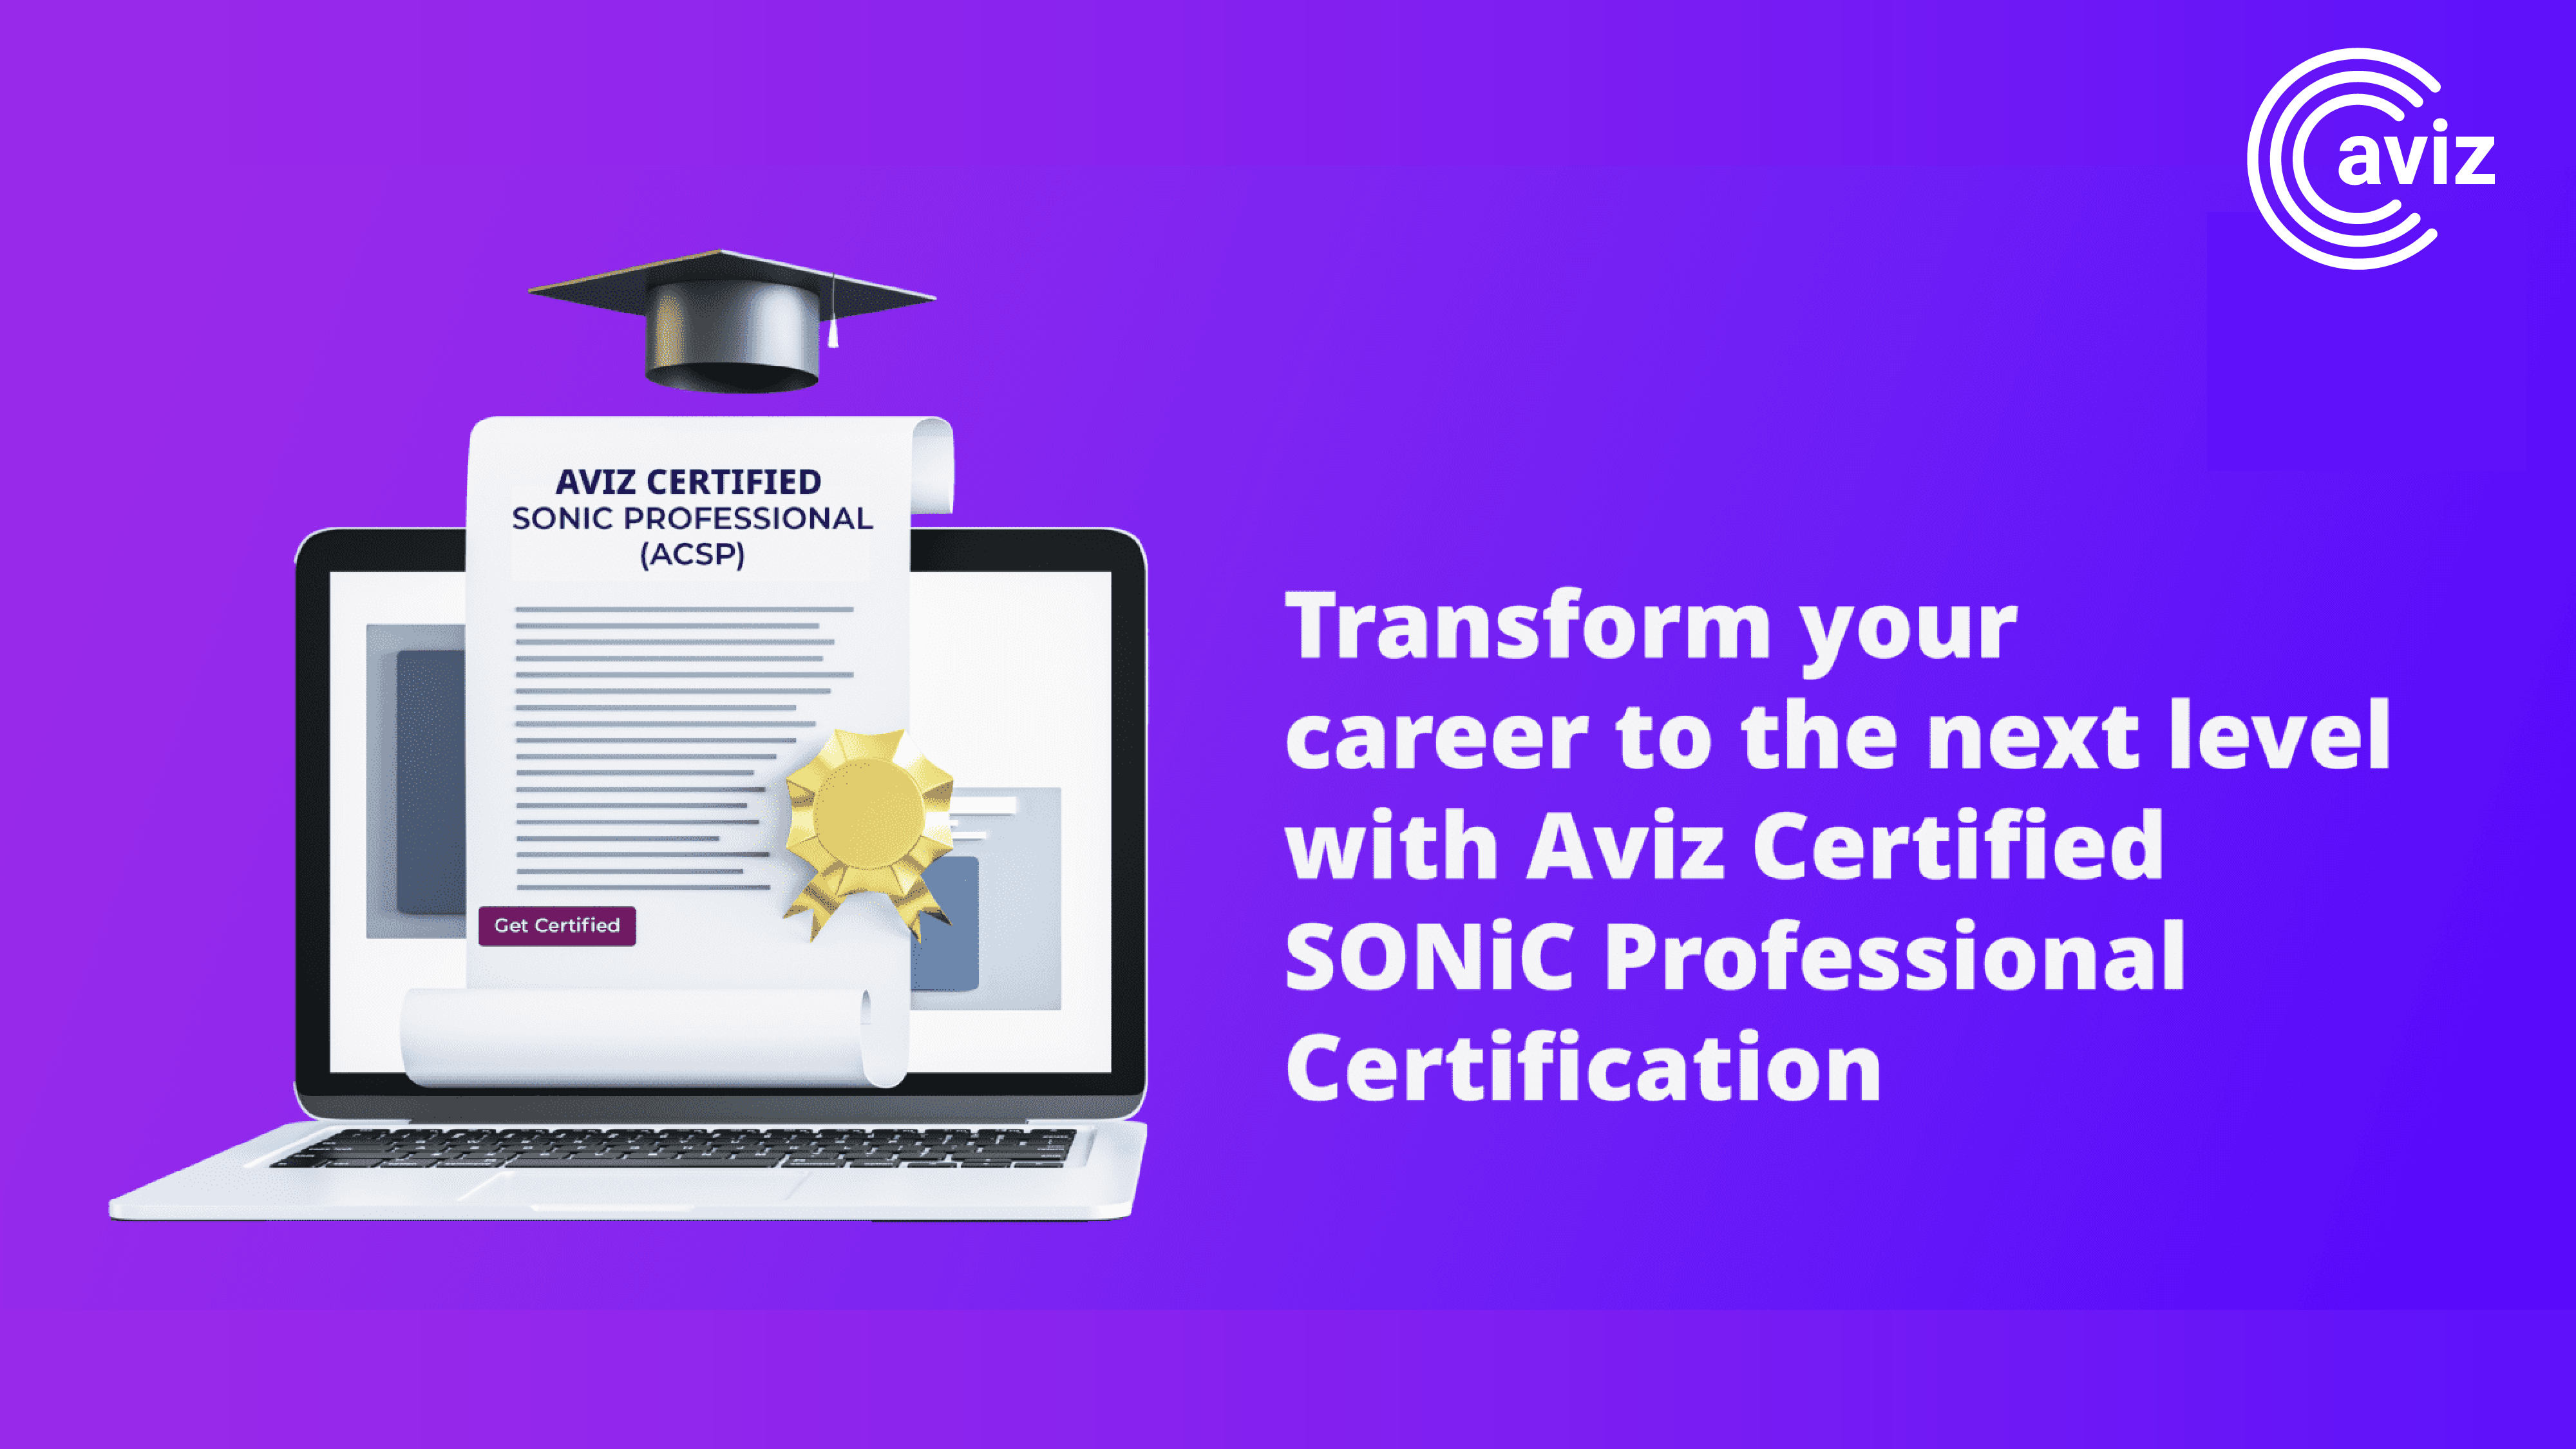 Advance Your SONiC Career with Aviz Certified Training